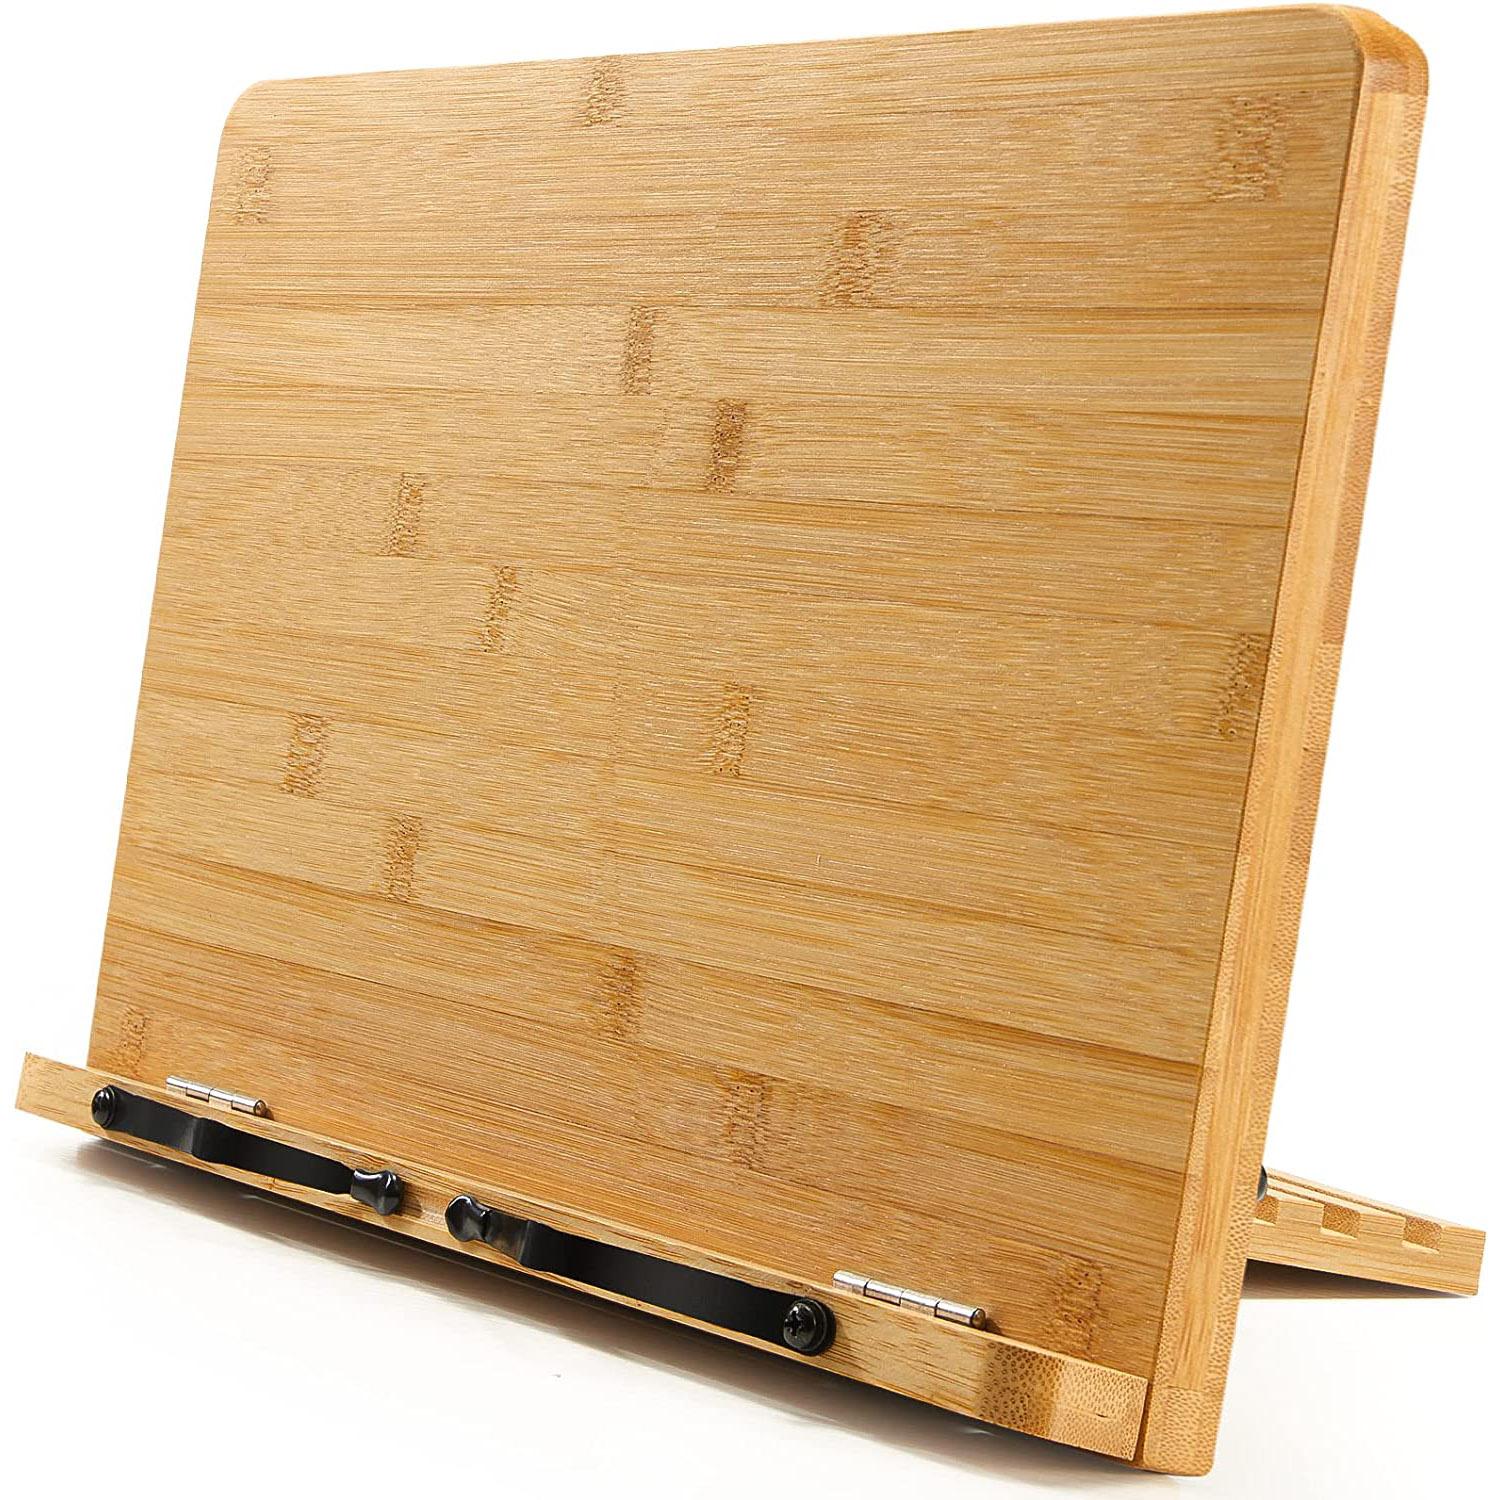 Pipishell Large Bamboo Book Tablet Laptop Stand for $8.99